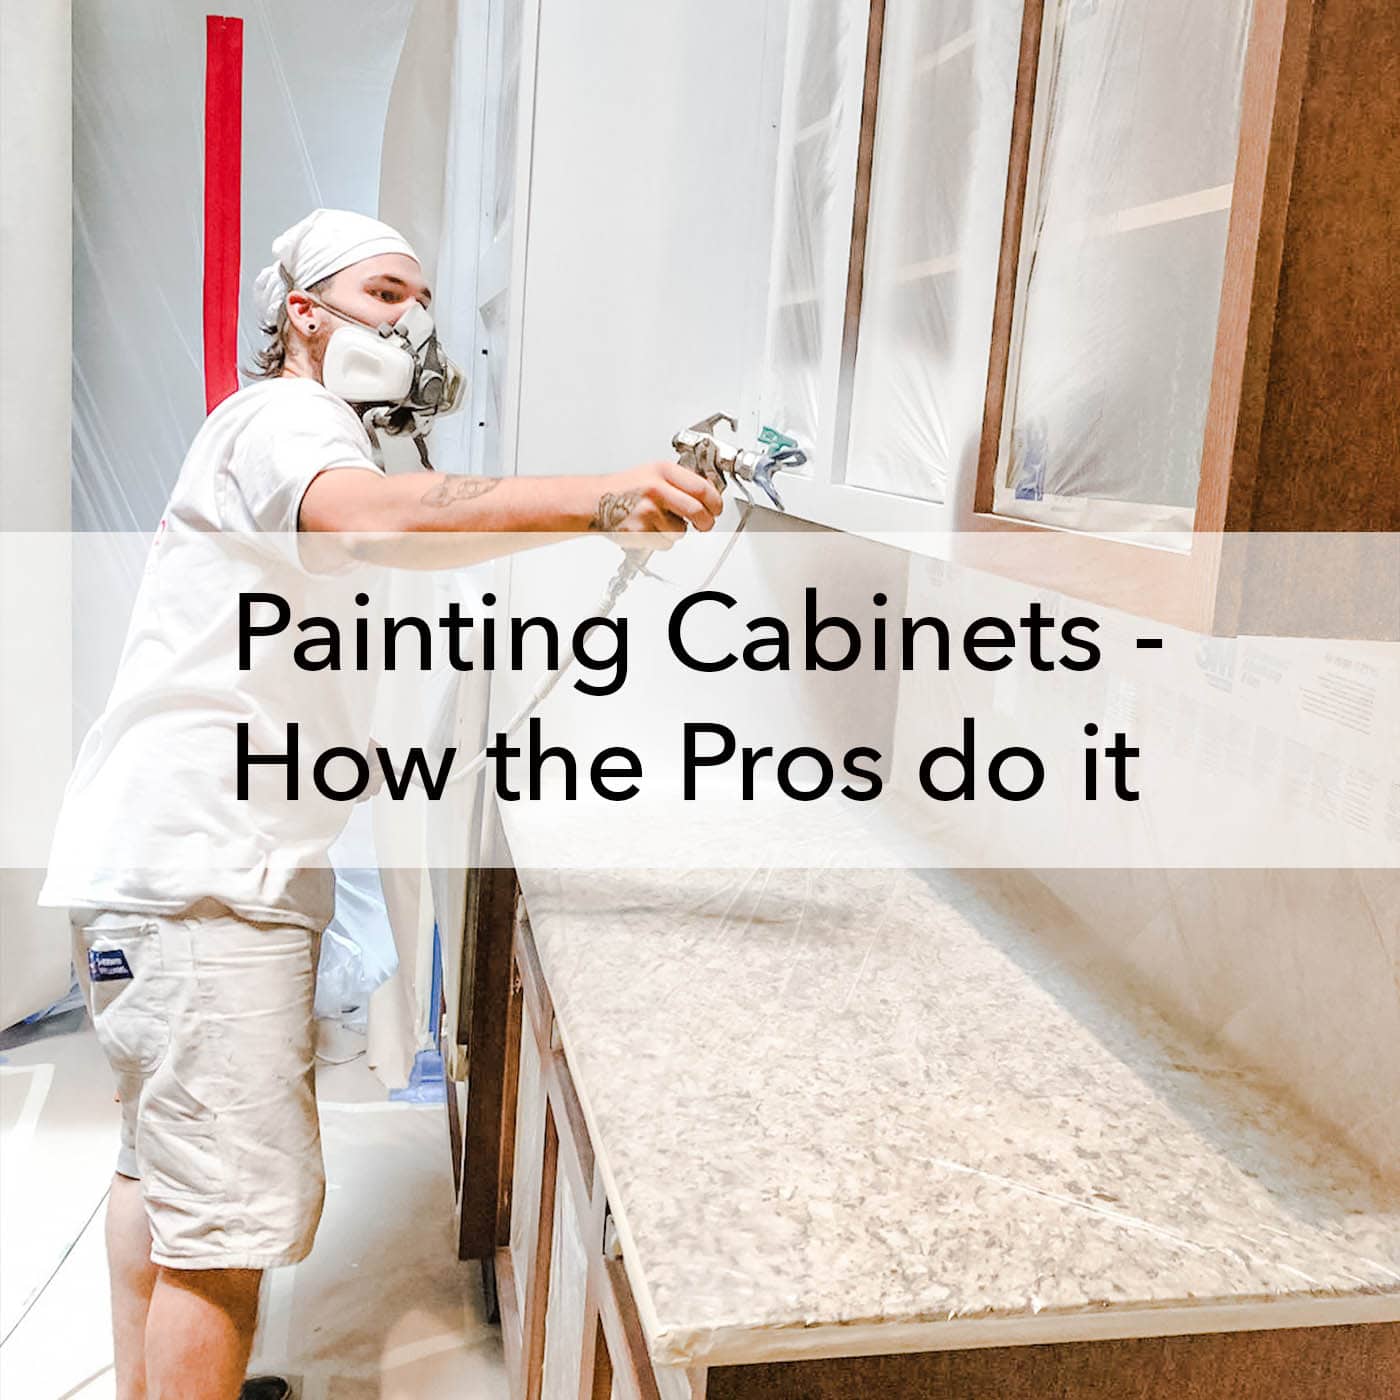 Painting Cabinets - How the Pros do it, blog, Paper Moon Painting, Austin TX